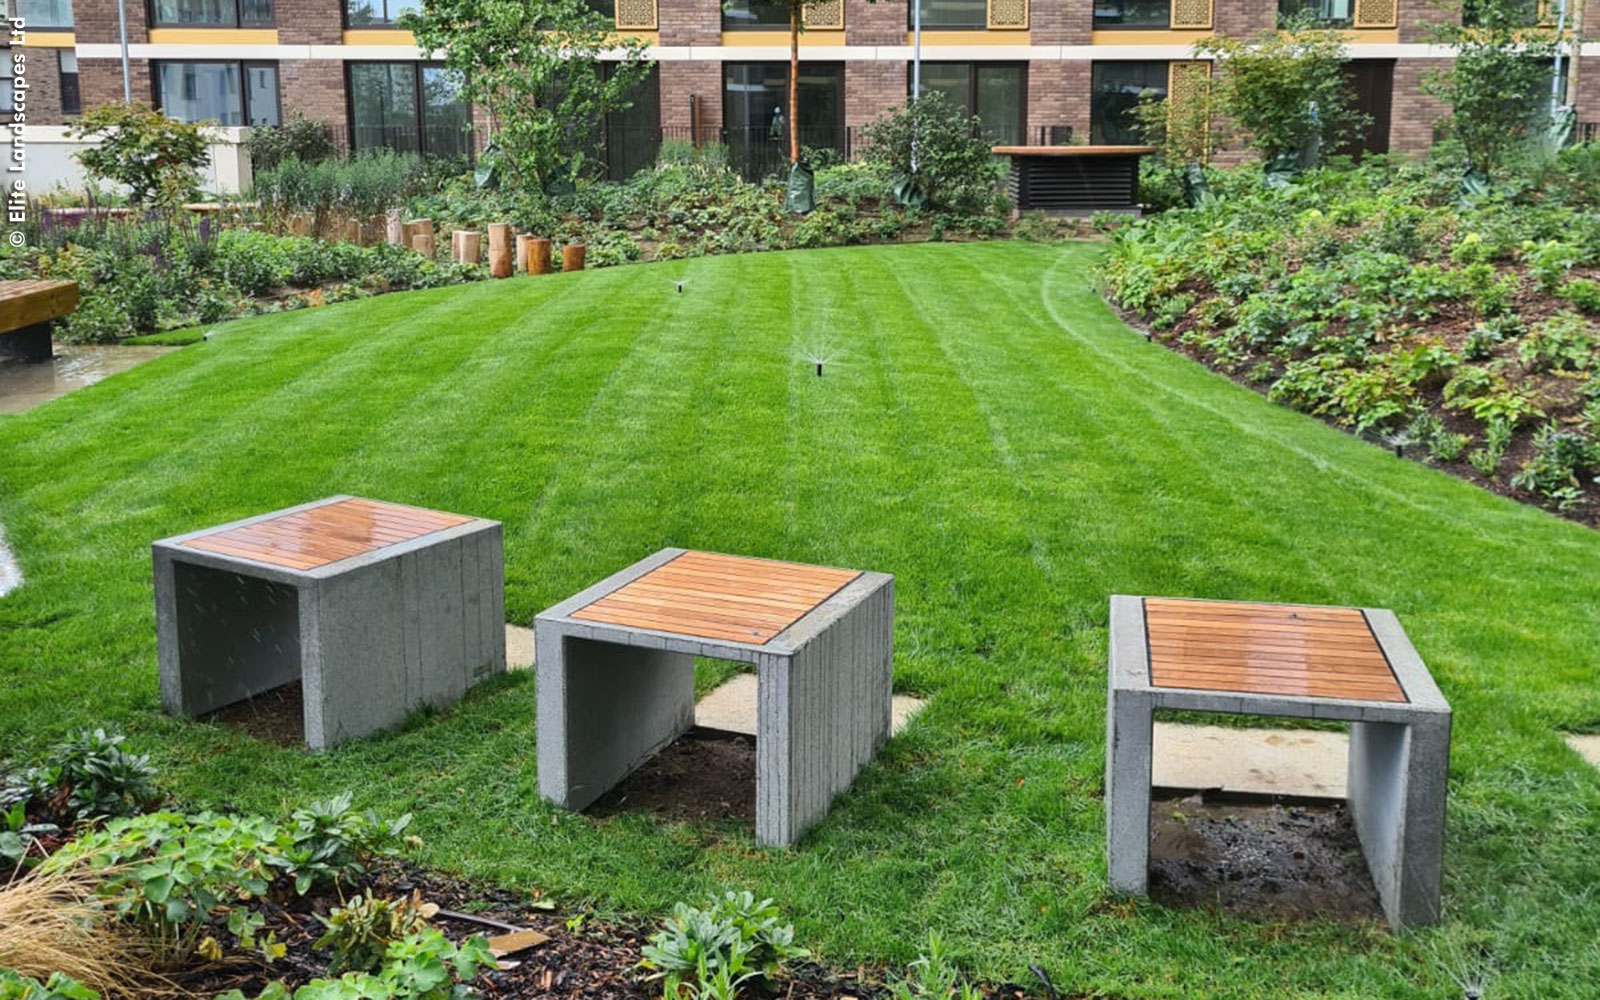 Garden with lawn and seats